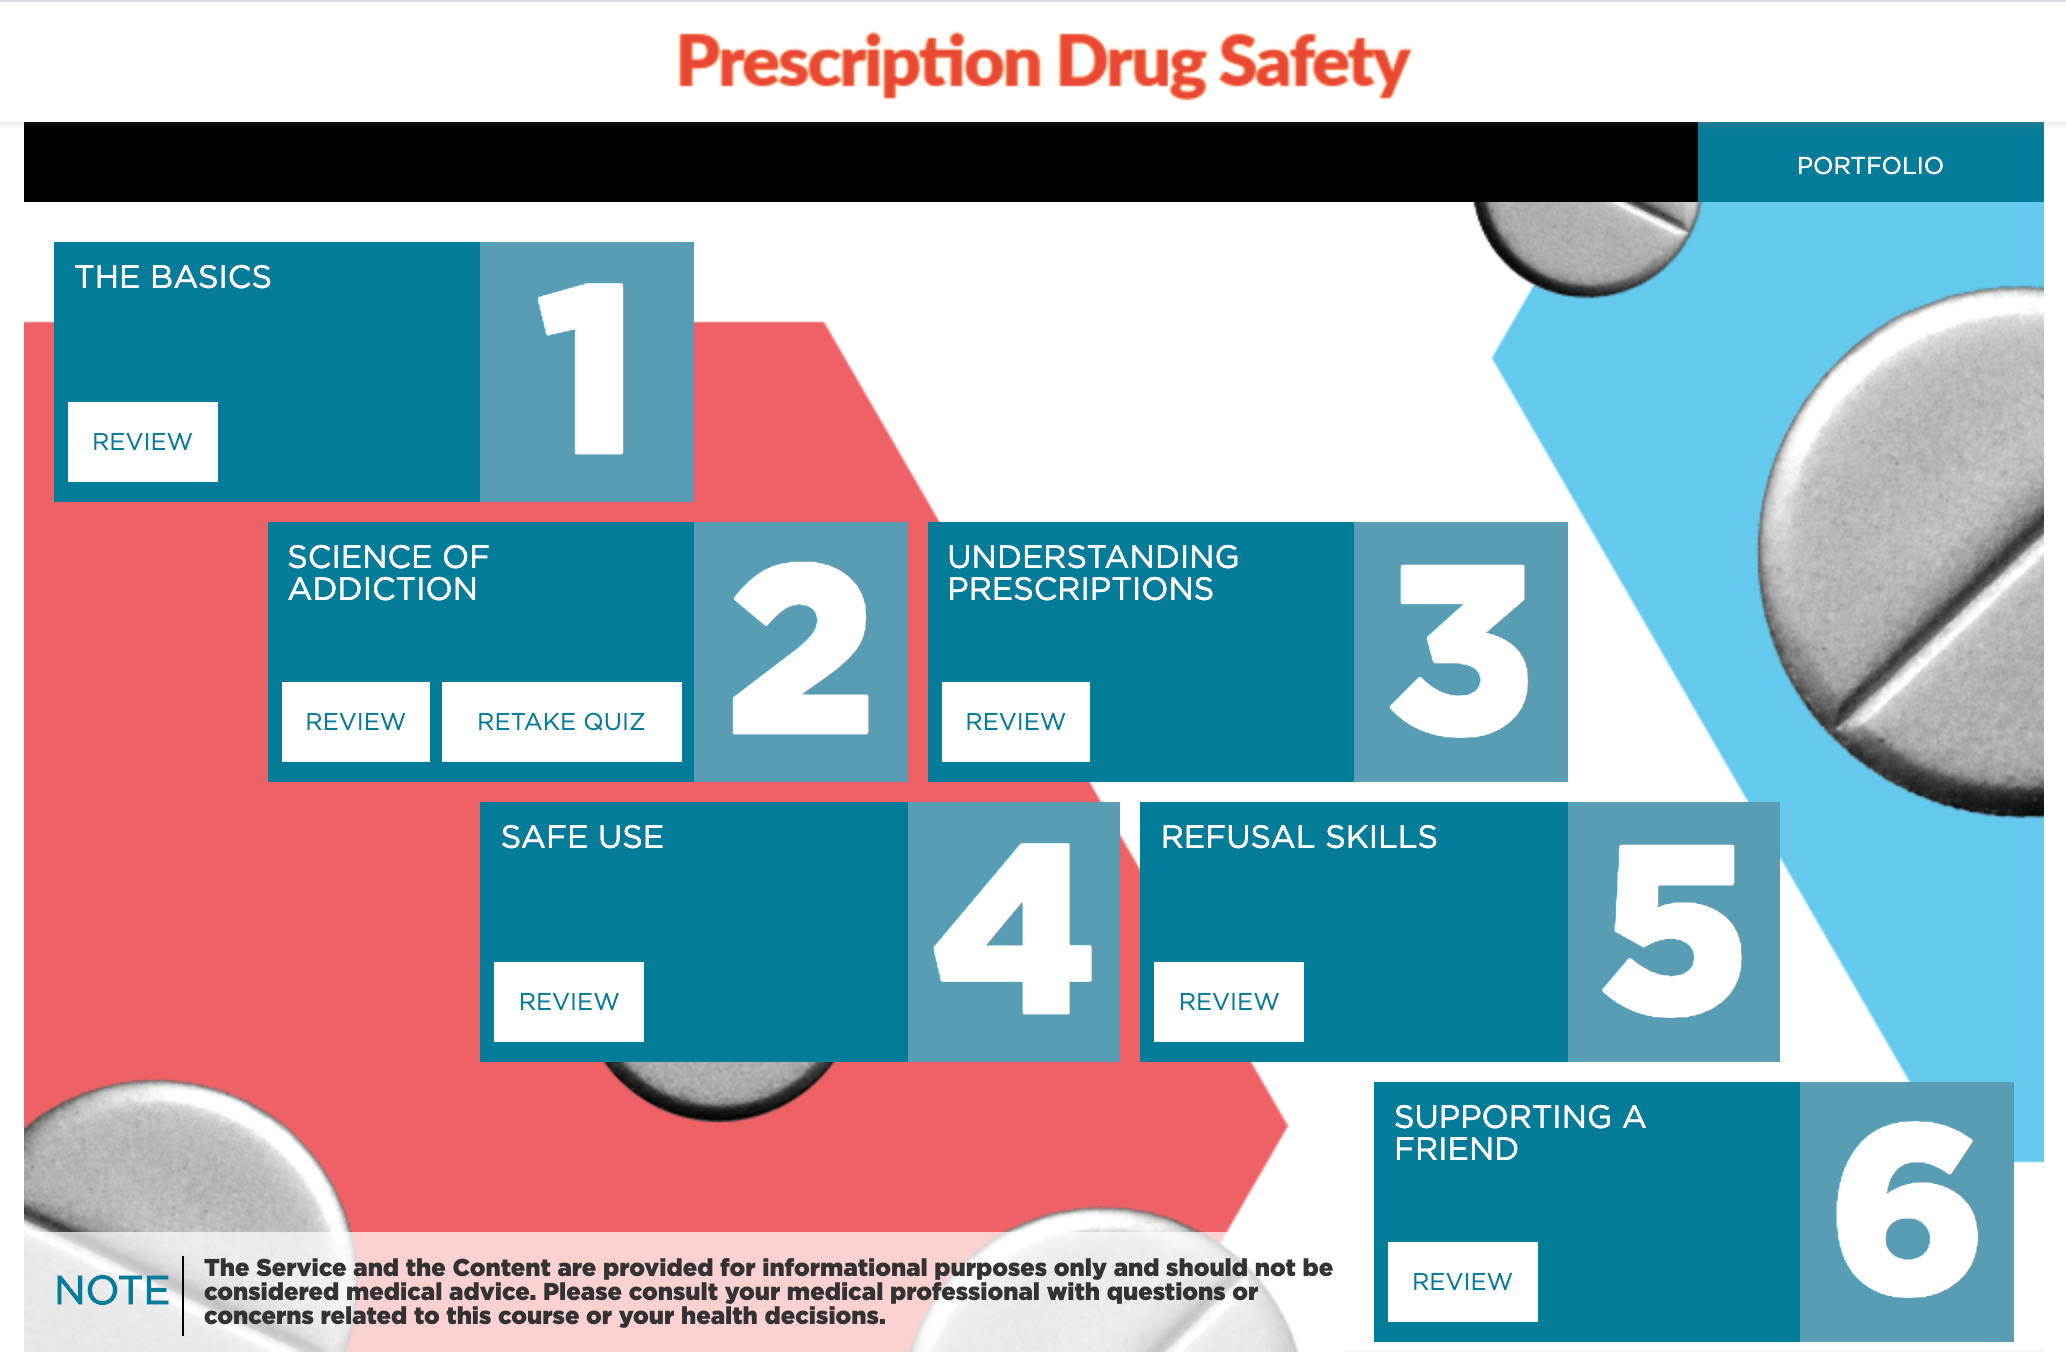 Helping Students Learn About Prescription Drug Safety